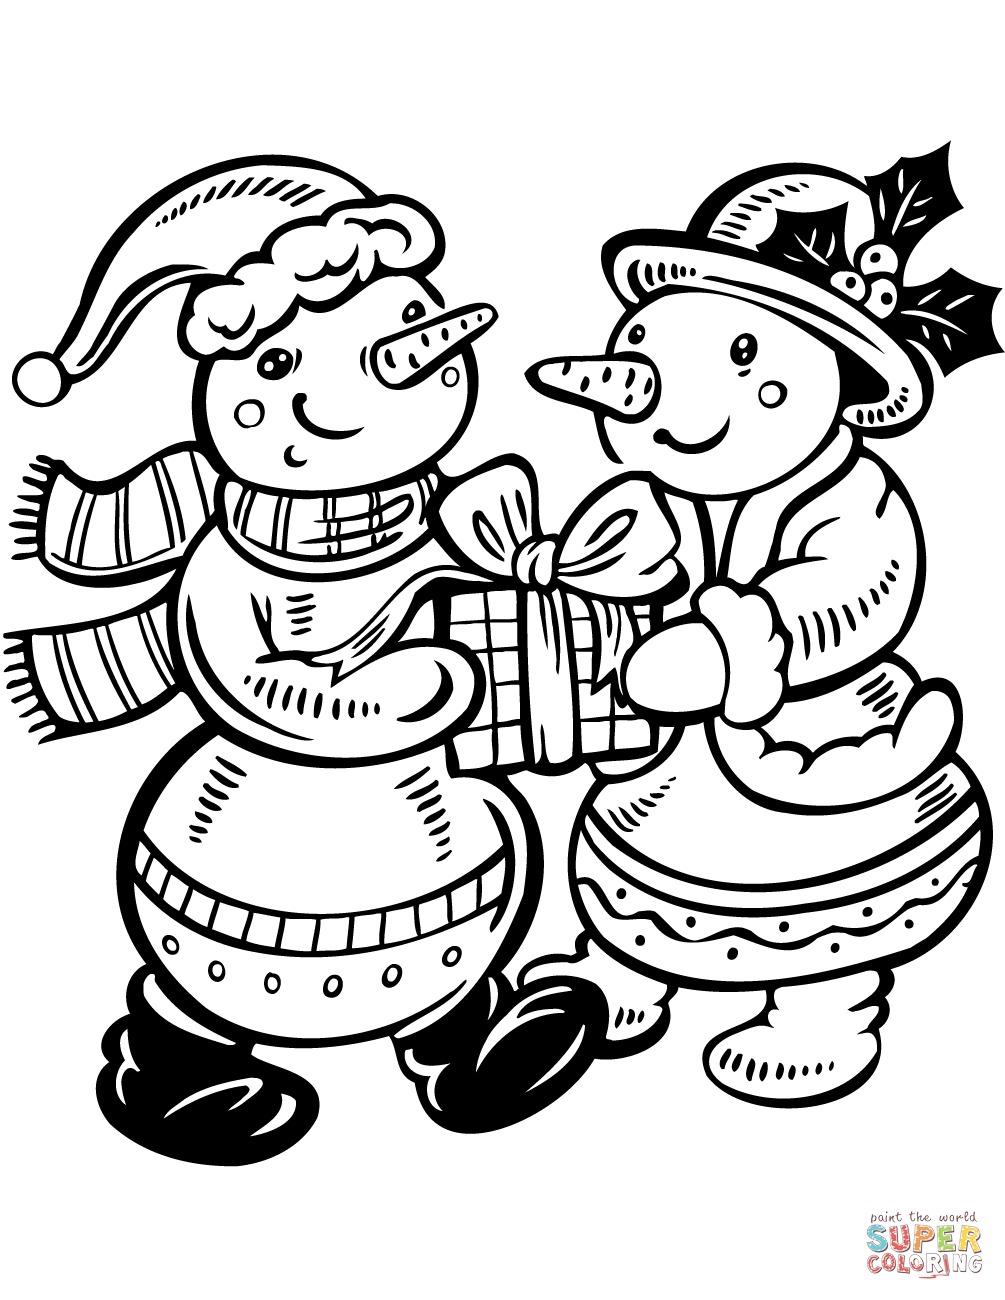 Snowmen in love coloring page free printable coloring pages